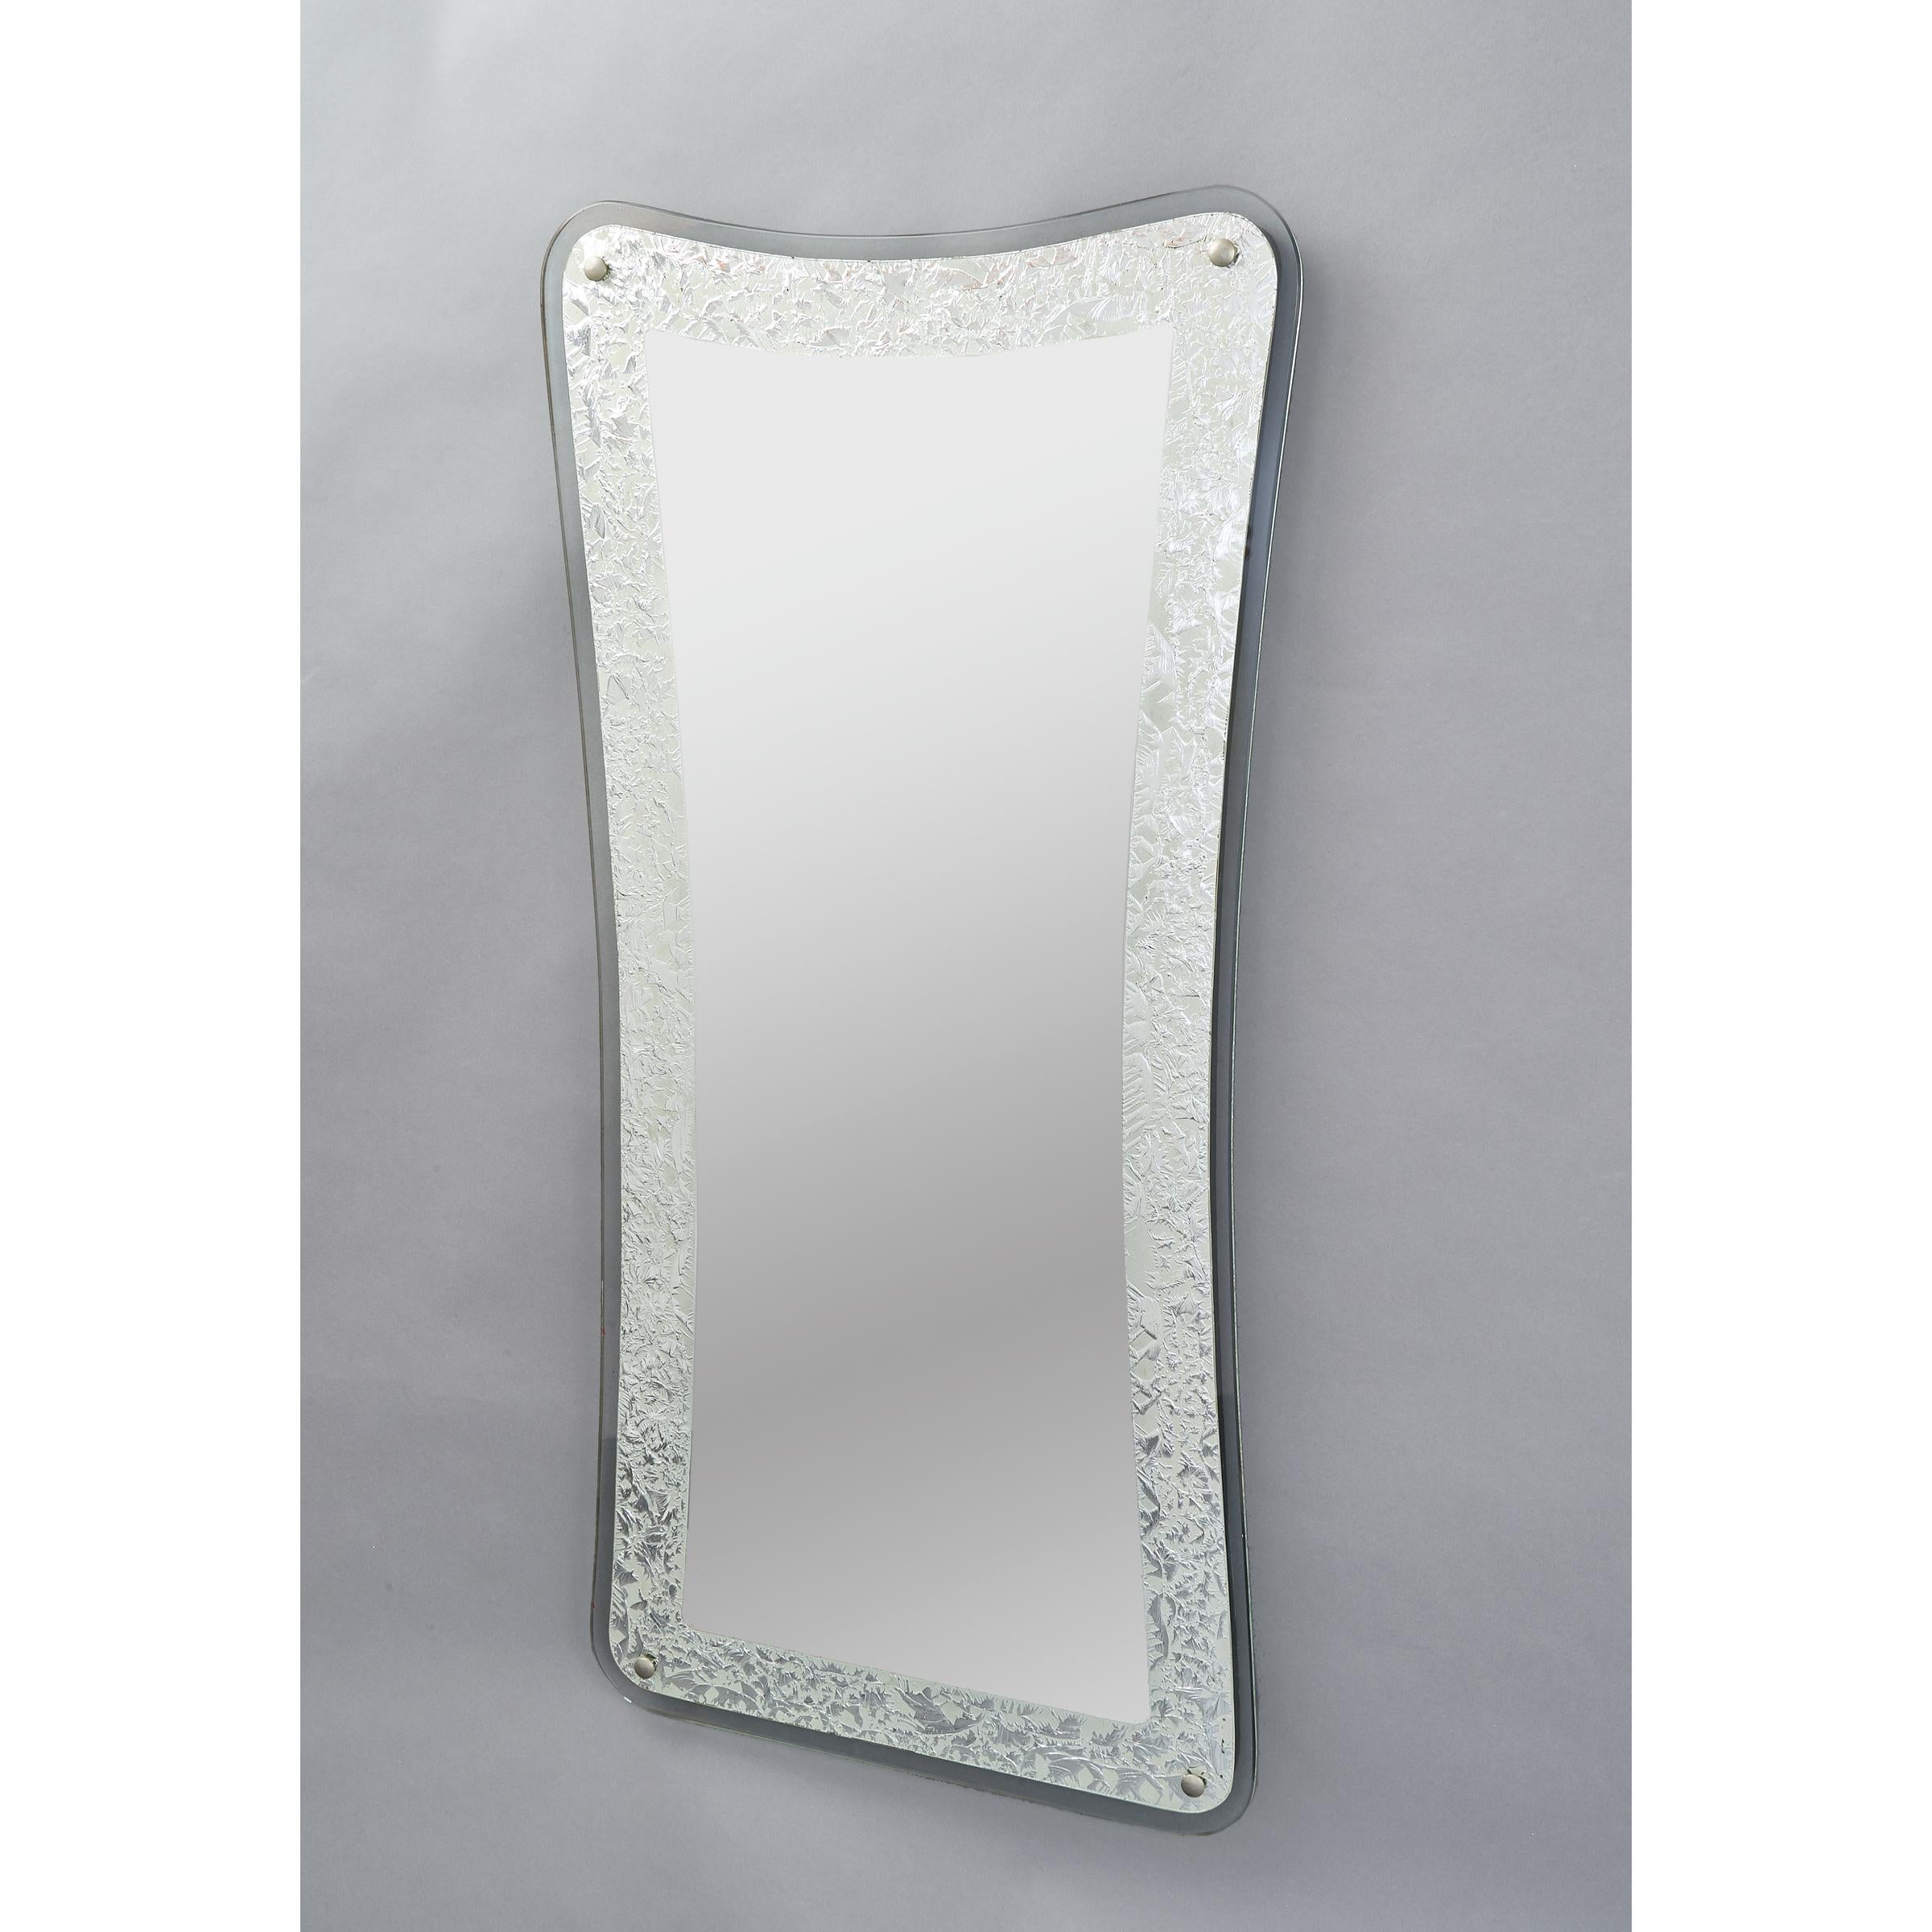 Italy, 1950s
Tall shaped mirror with textured silver foil ornemental border
Measures: 47 H x 22 W x 1 D.